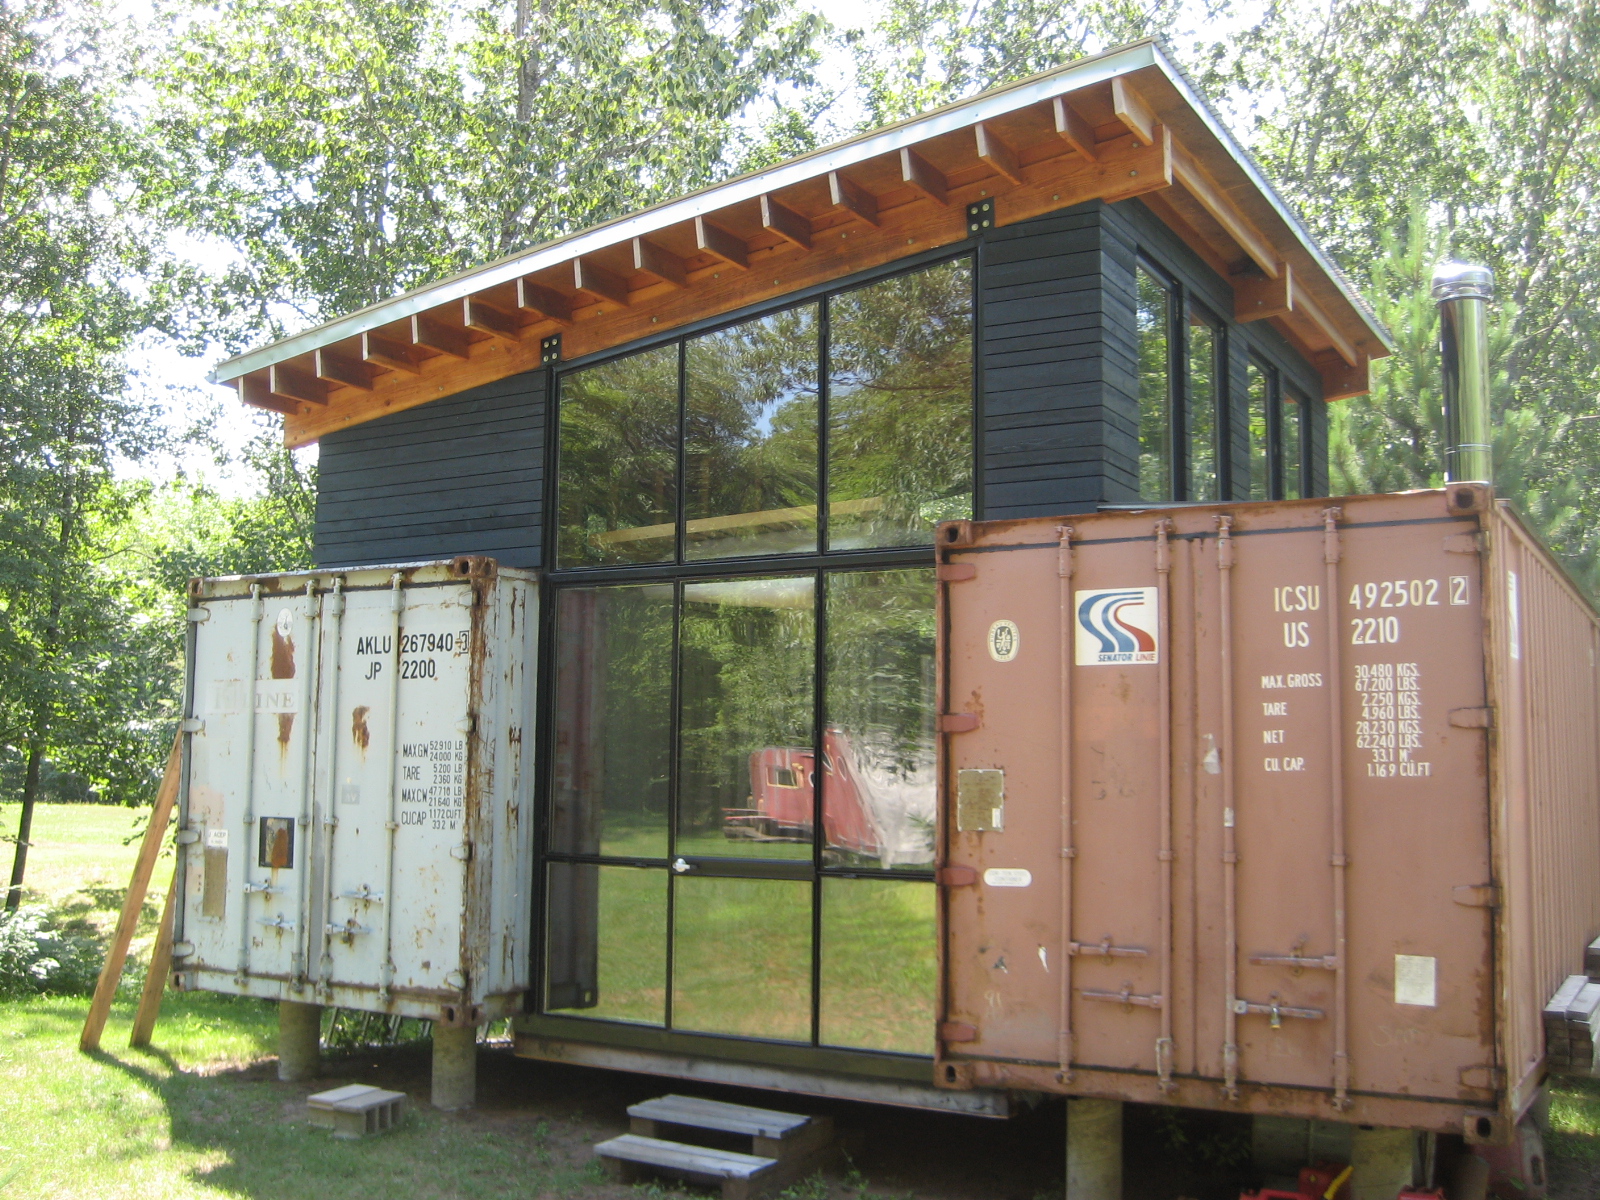 Shipping container architecture - Wikipedia, the free encyclopedia